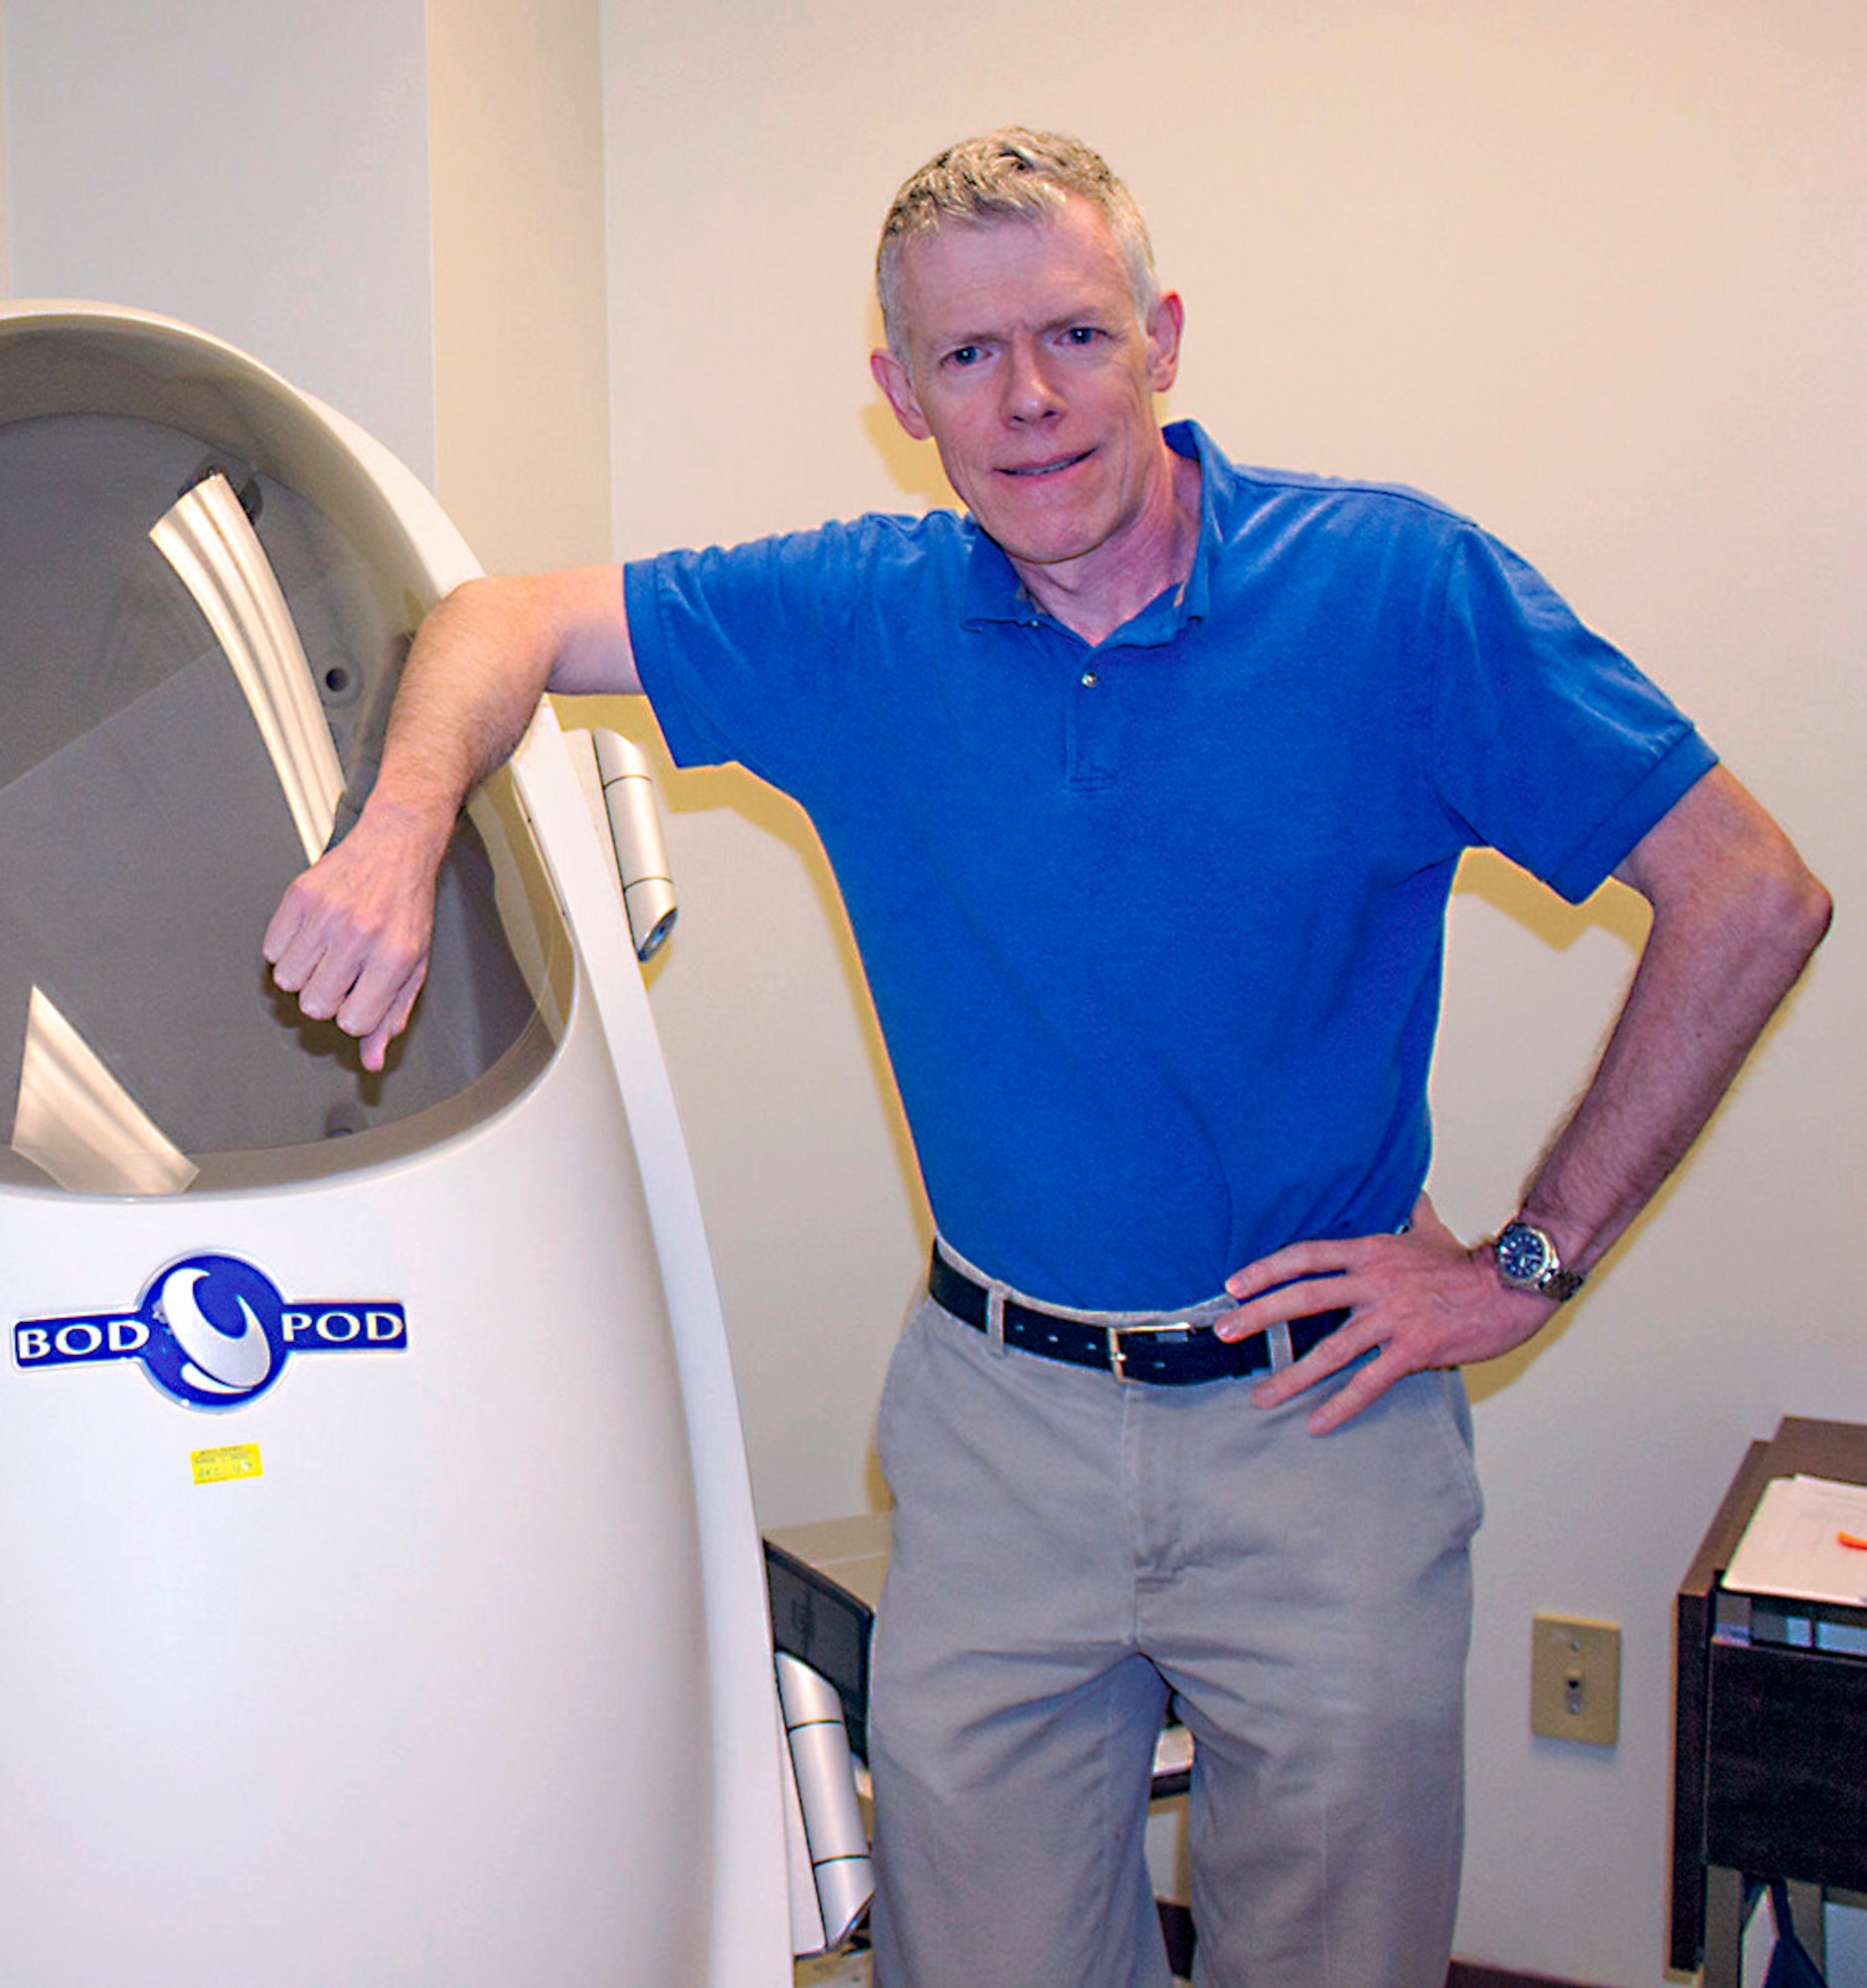 Guy Leahy and the 377 Medical Group Health Promotion BodPod.